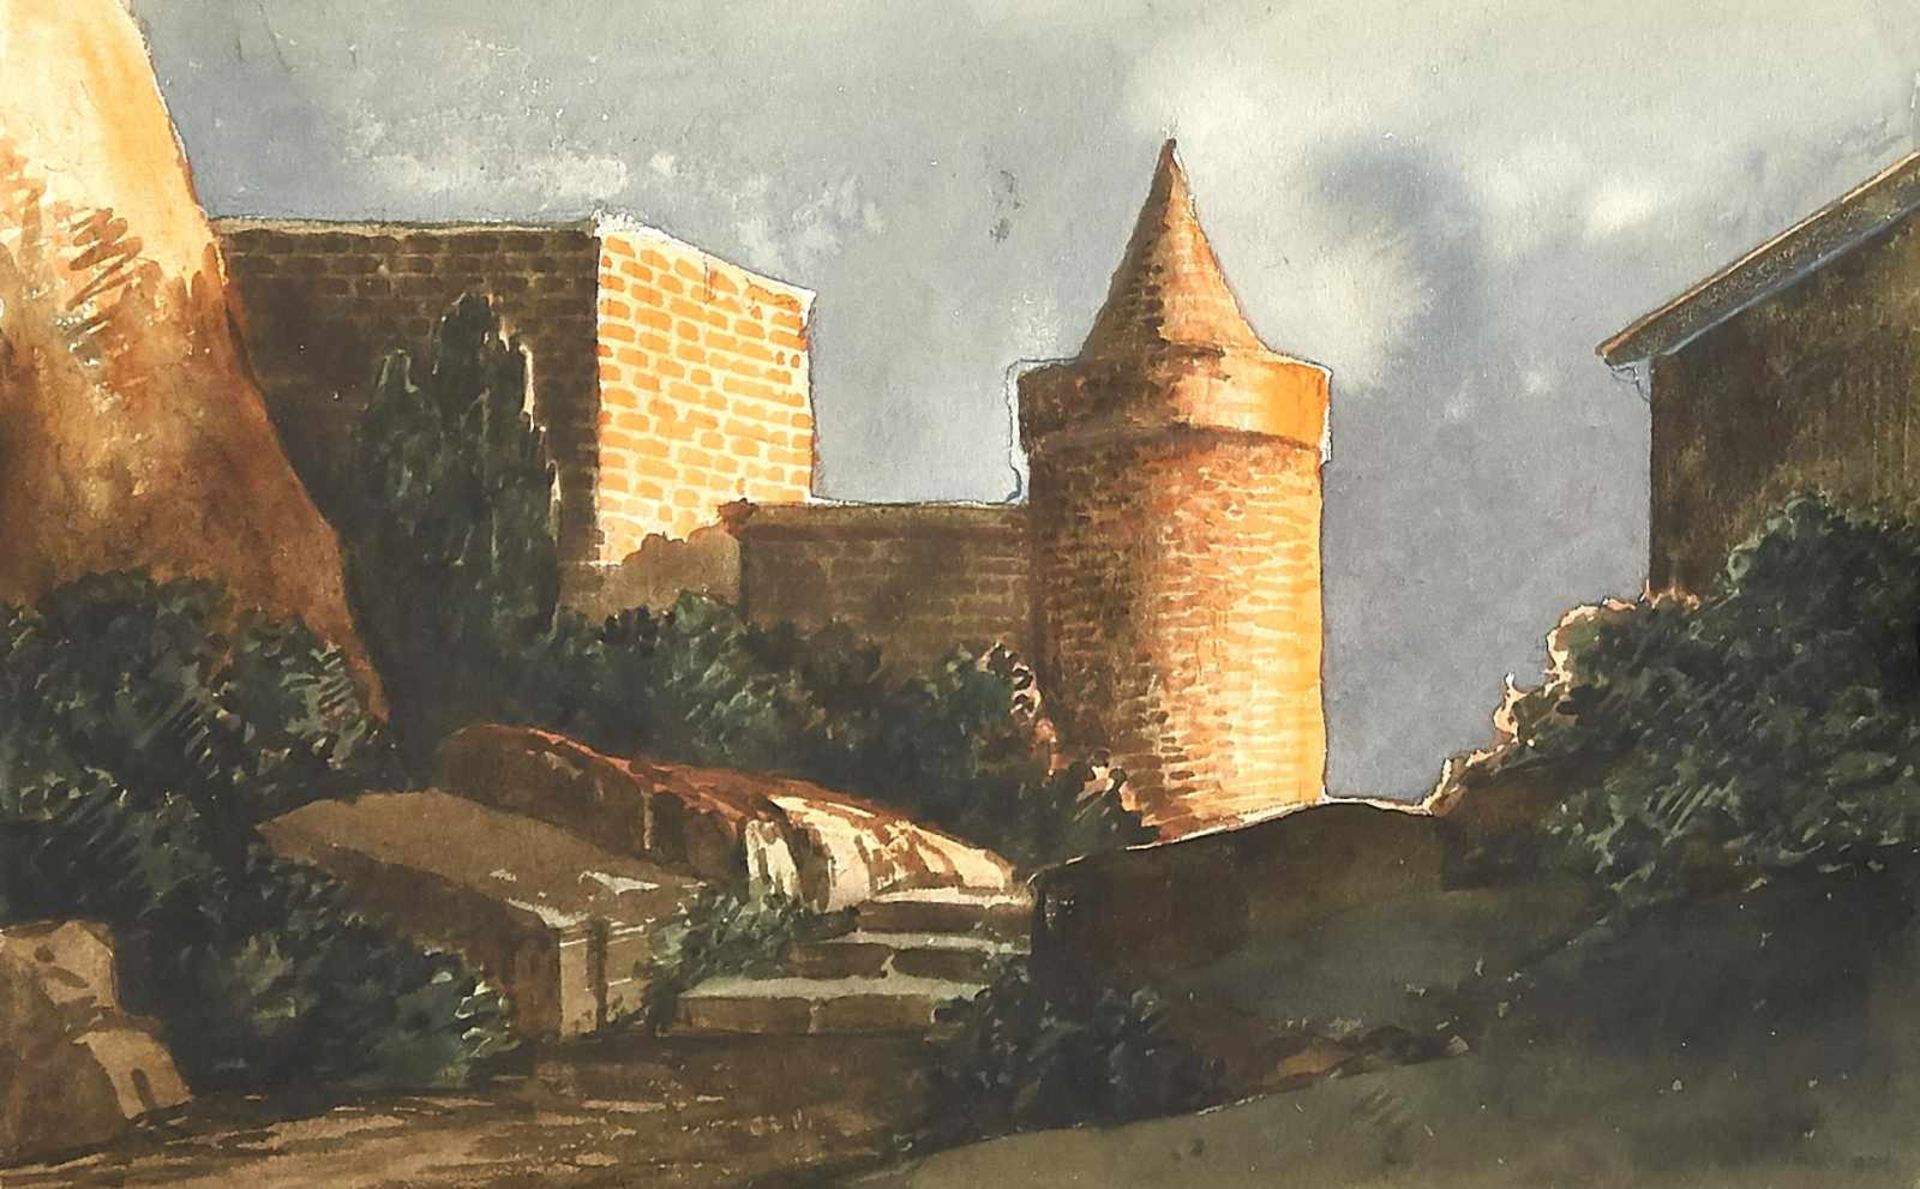 H. Buttstaedt, landscape painter at the beginning of the 20th century, compilation of 23